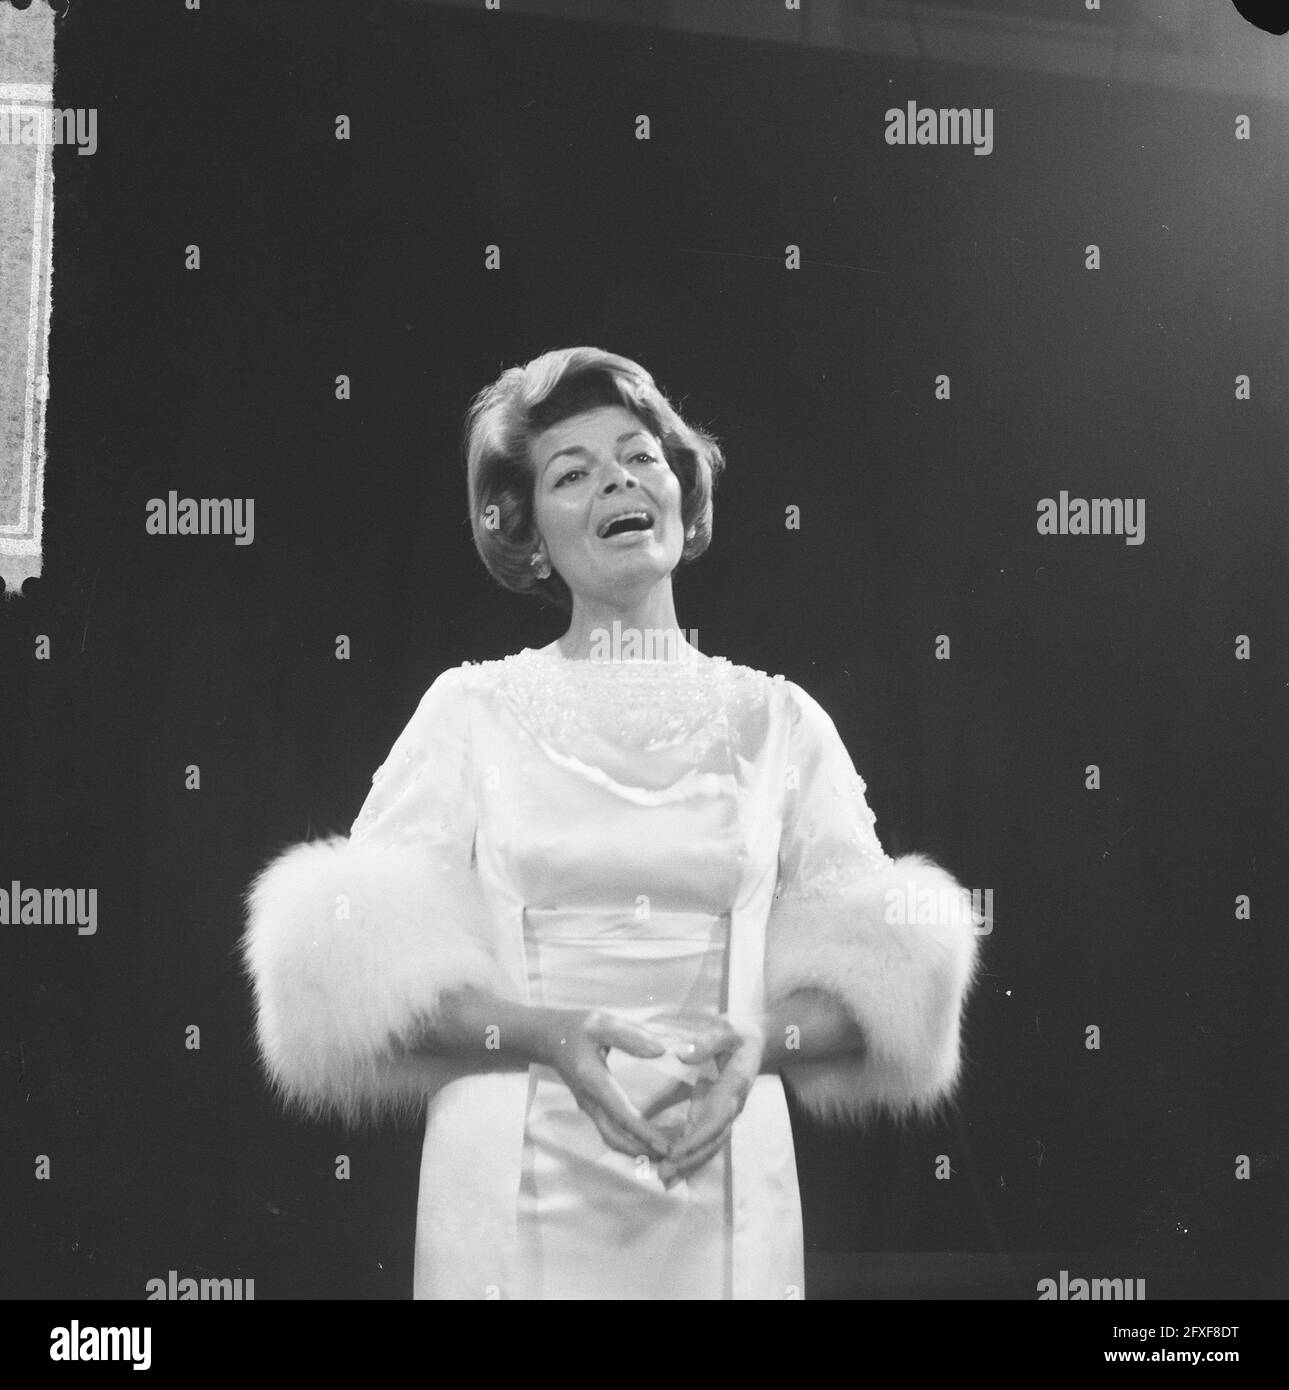 TV show Well you again, Lys Assia (singing), December 4, 1964, TV shows, The Netherlands, 20th century press agency photo, news to remember, documentary, historic photography 1945-1990, visual stories, human history of the Twentieth Century, capturing moments in time Stock Photo